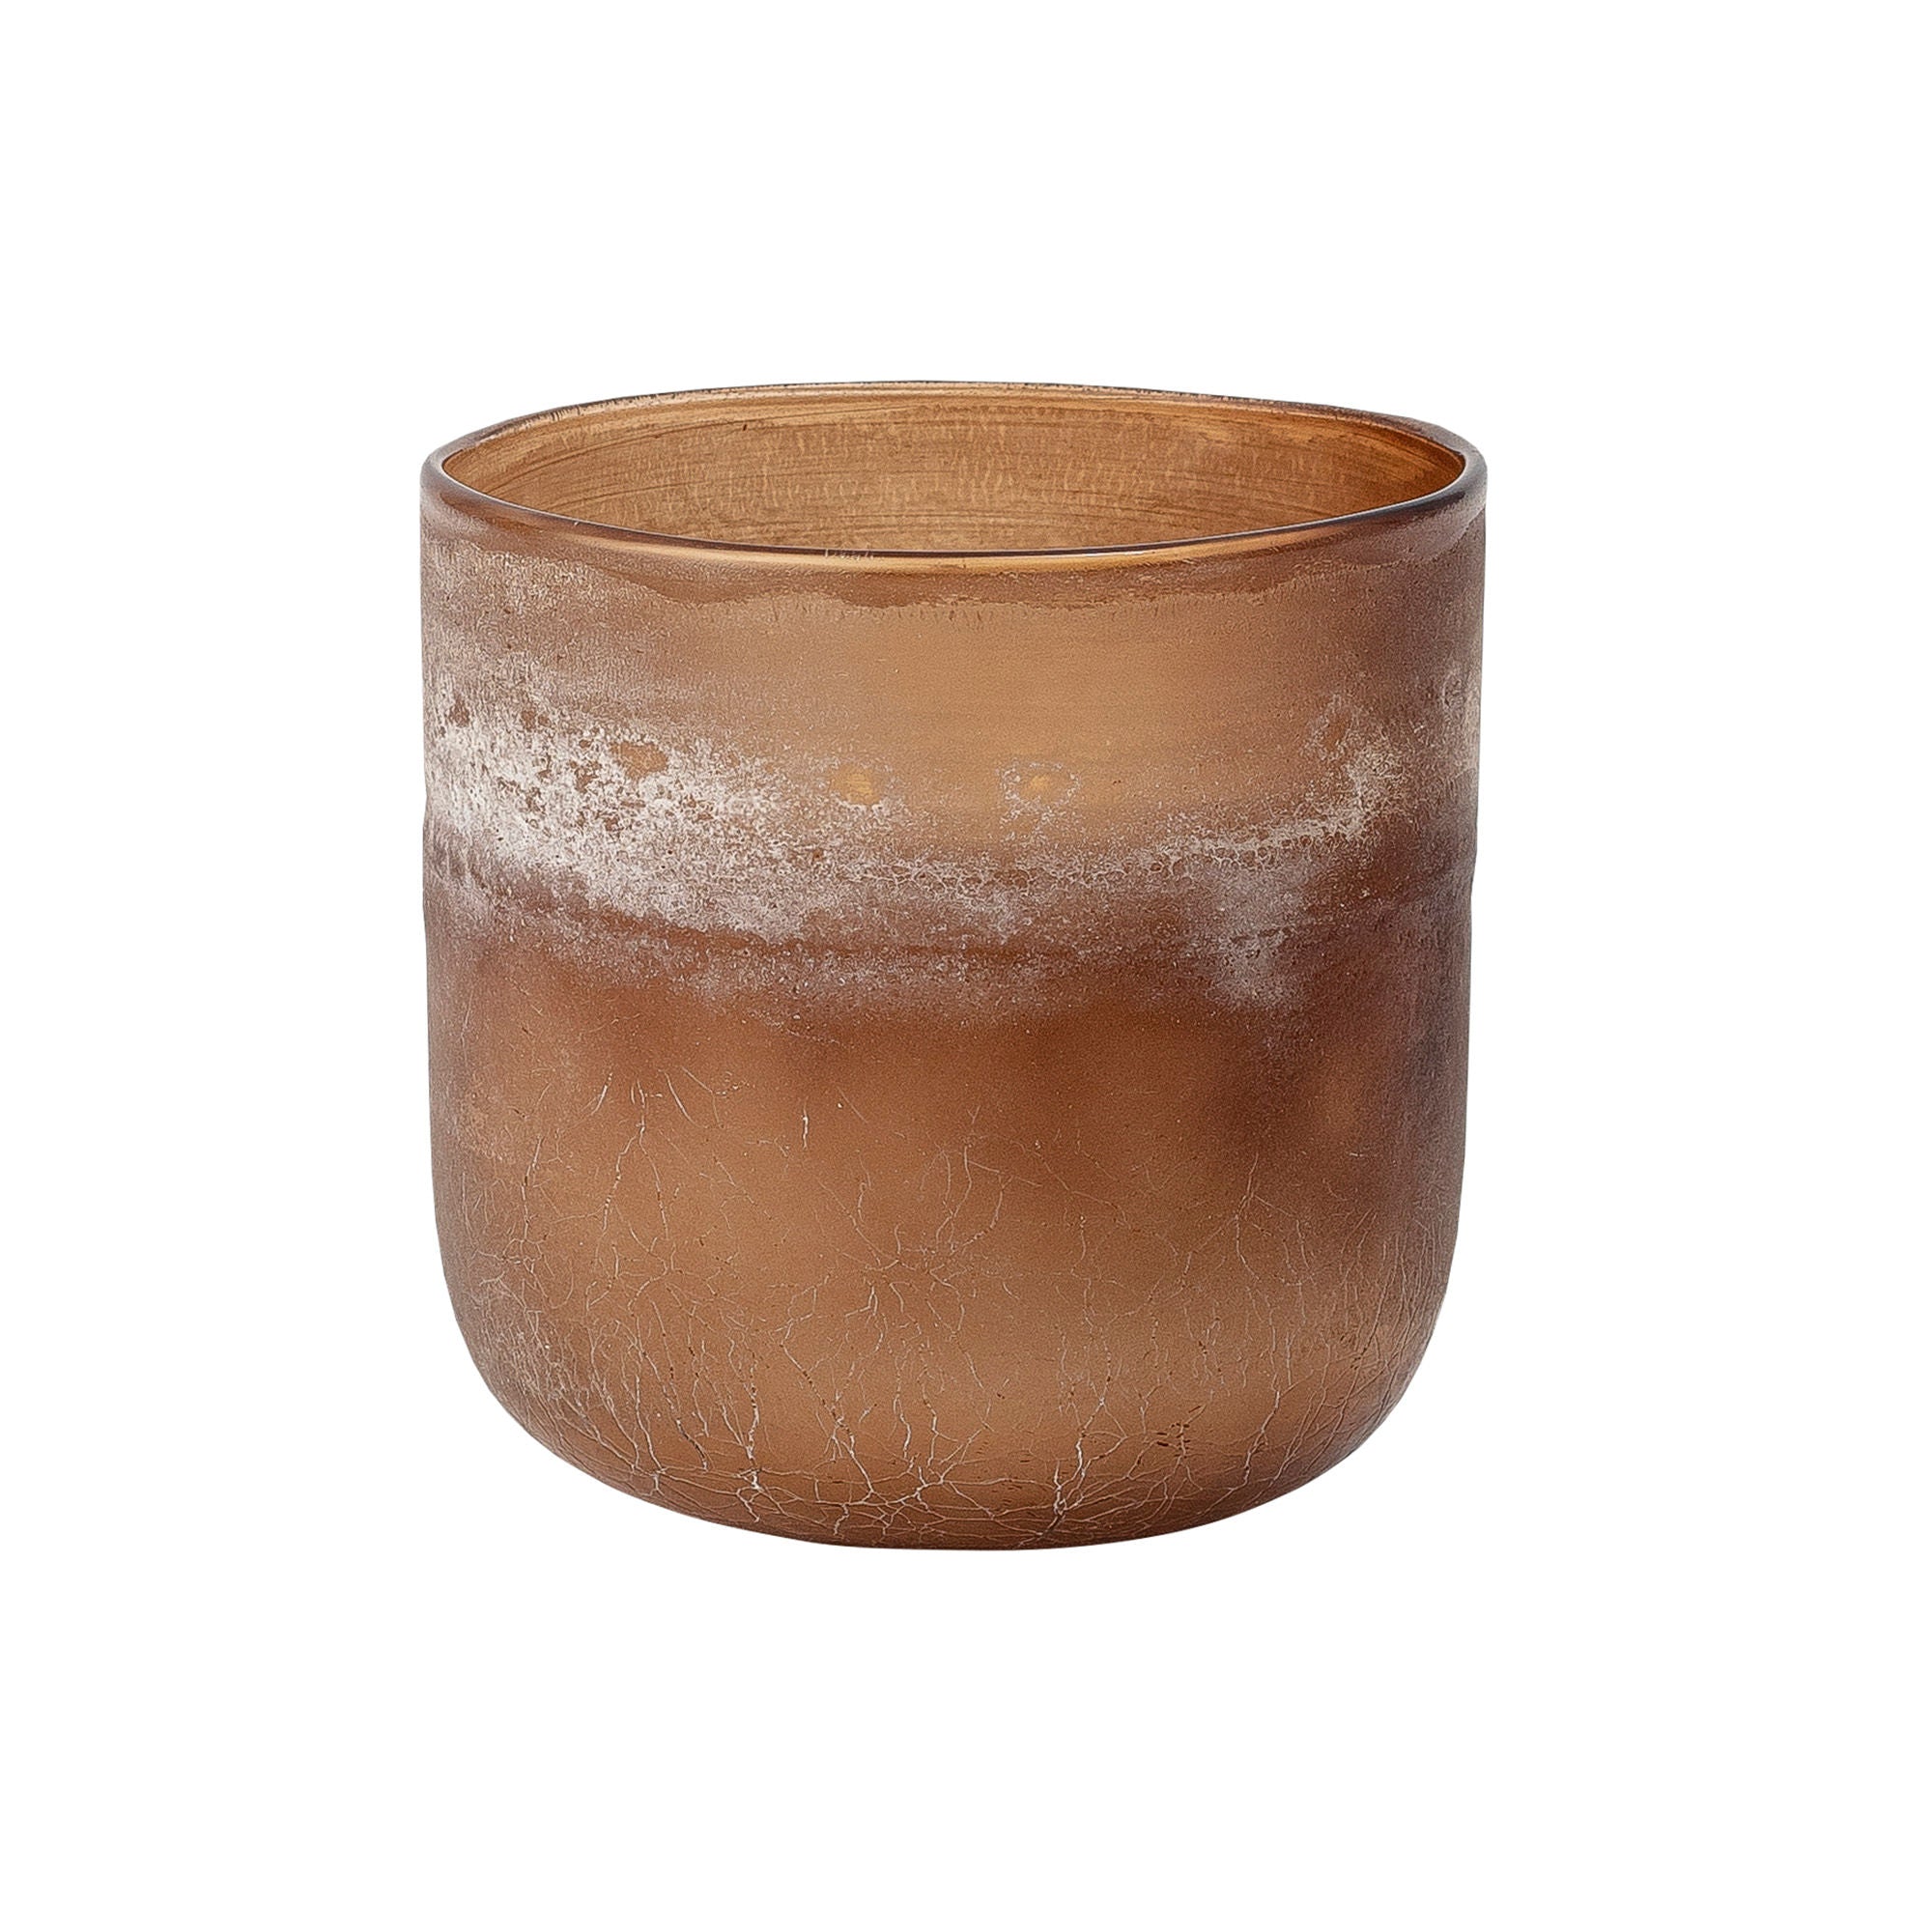 Illume X Bloomingville NO.6-Sequoia Scent Candle, Brown, Wax